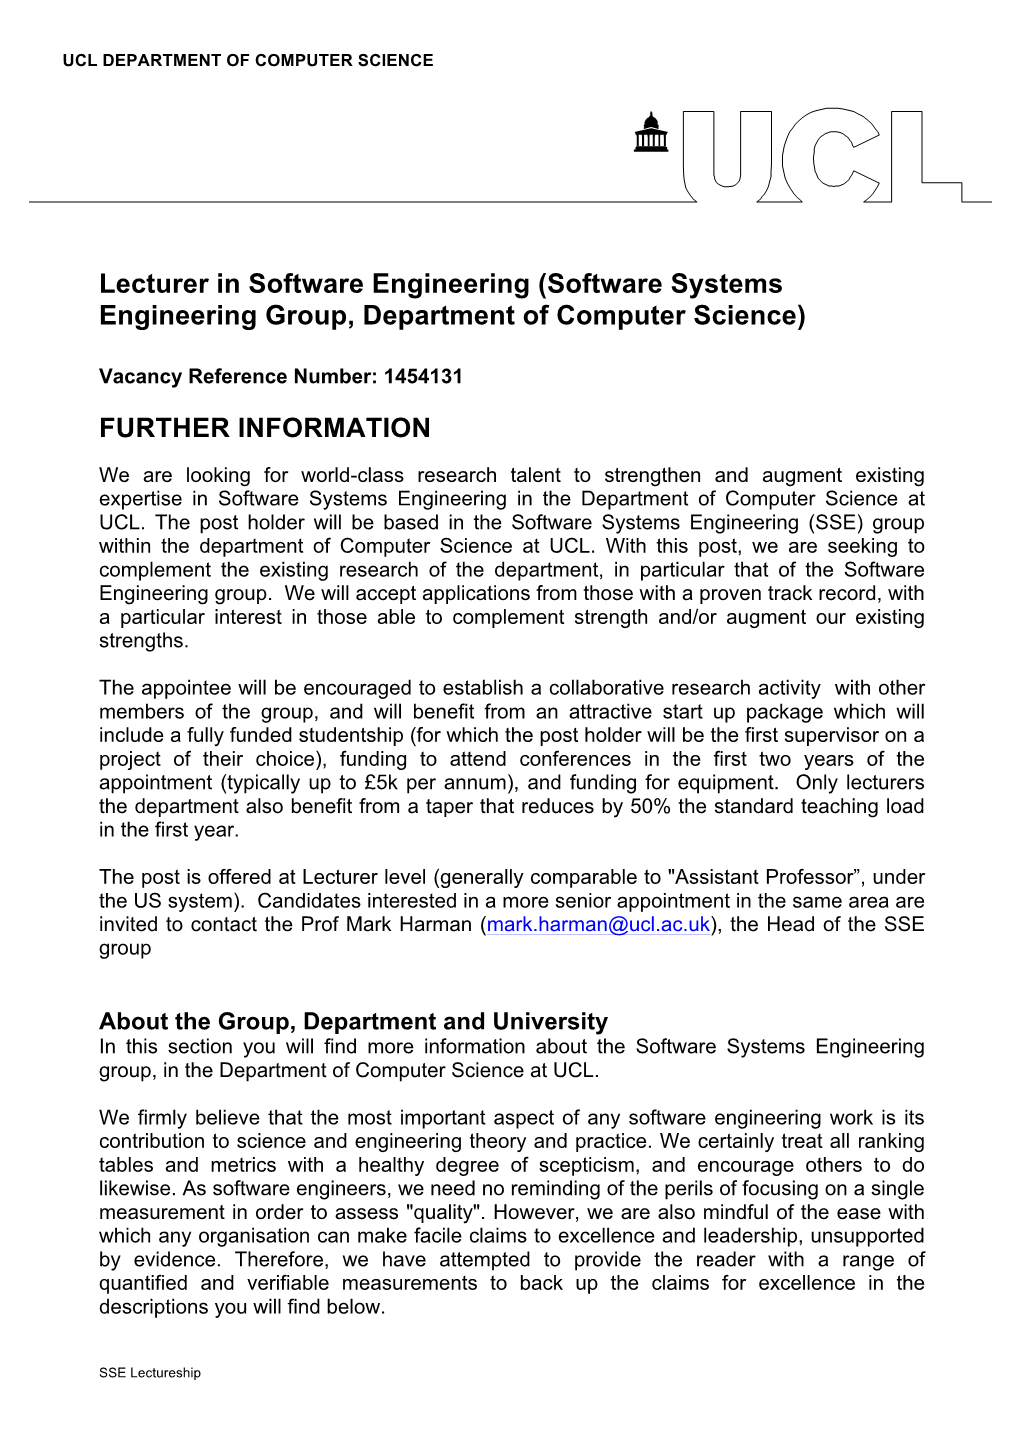 Lecturer in Software Engineering (Software Systems Engineering Group, Department of Computer Science)